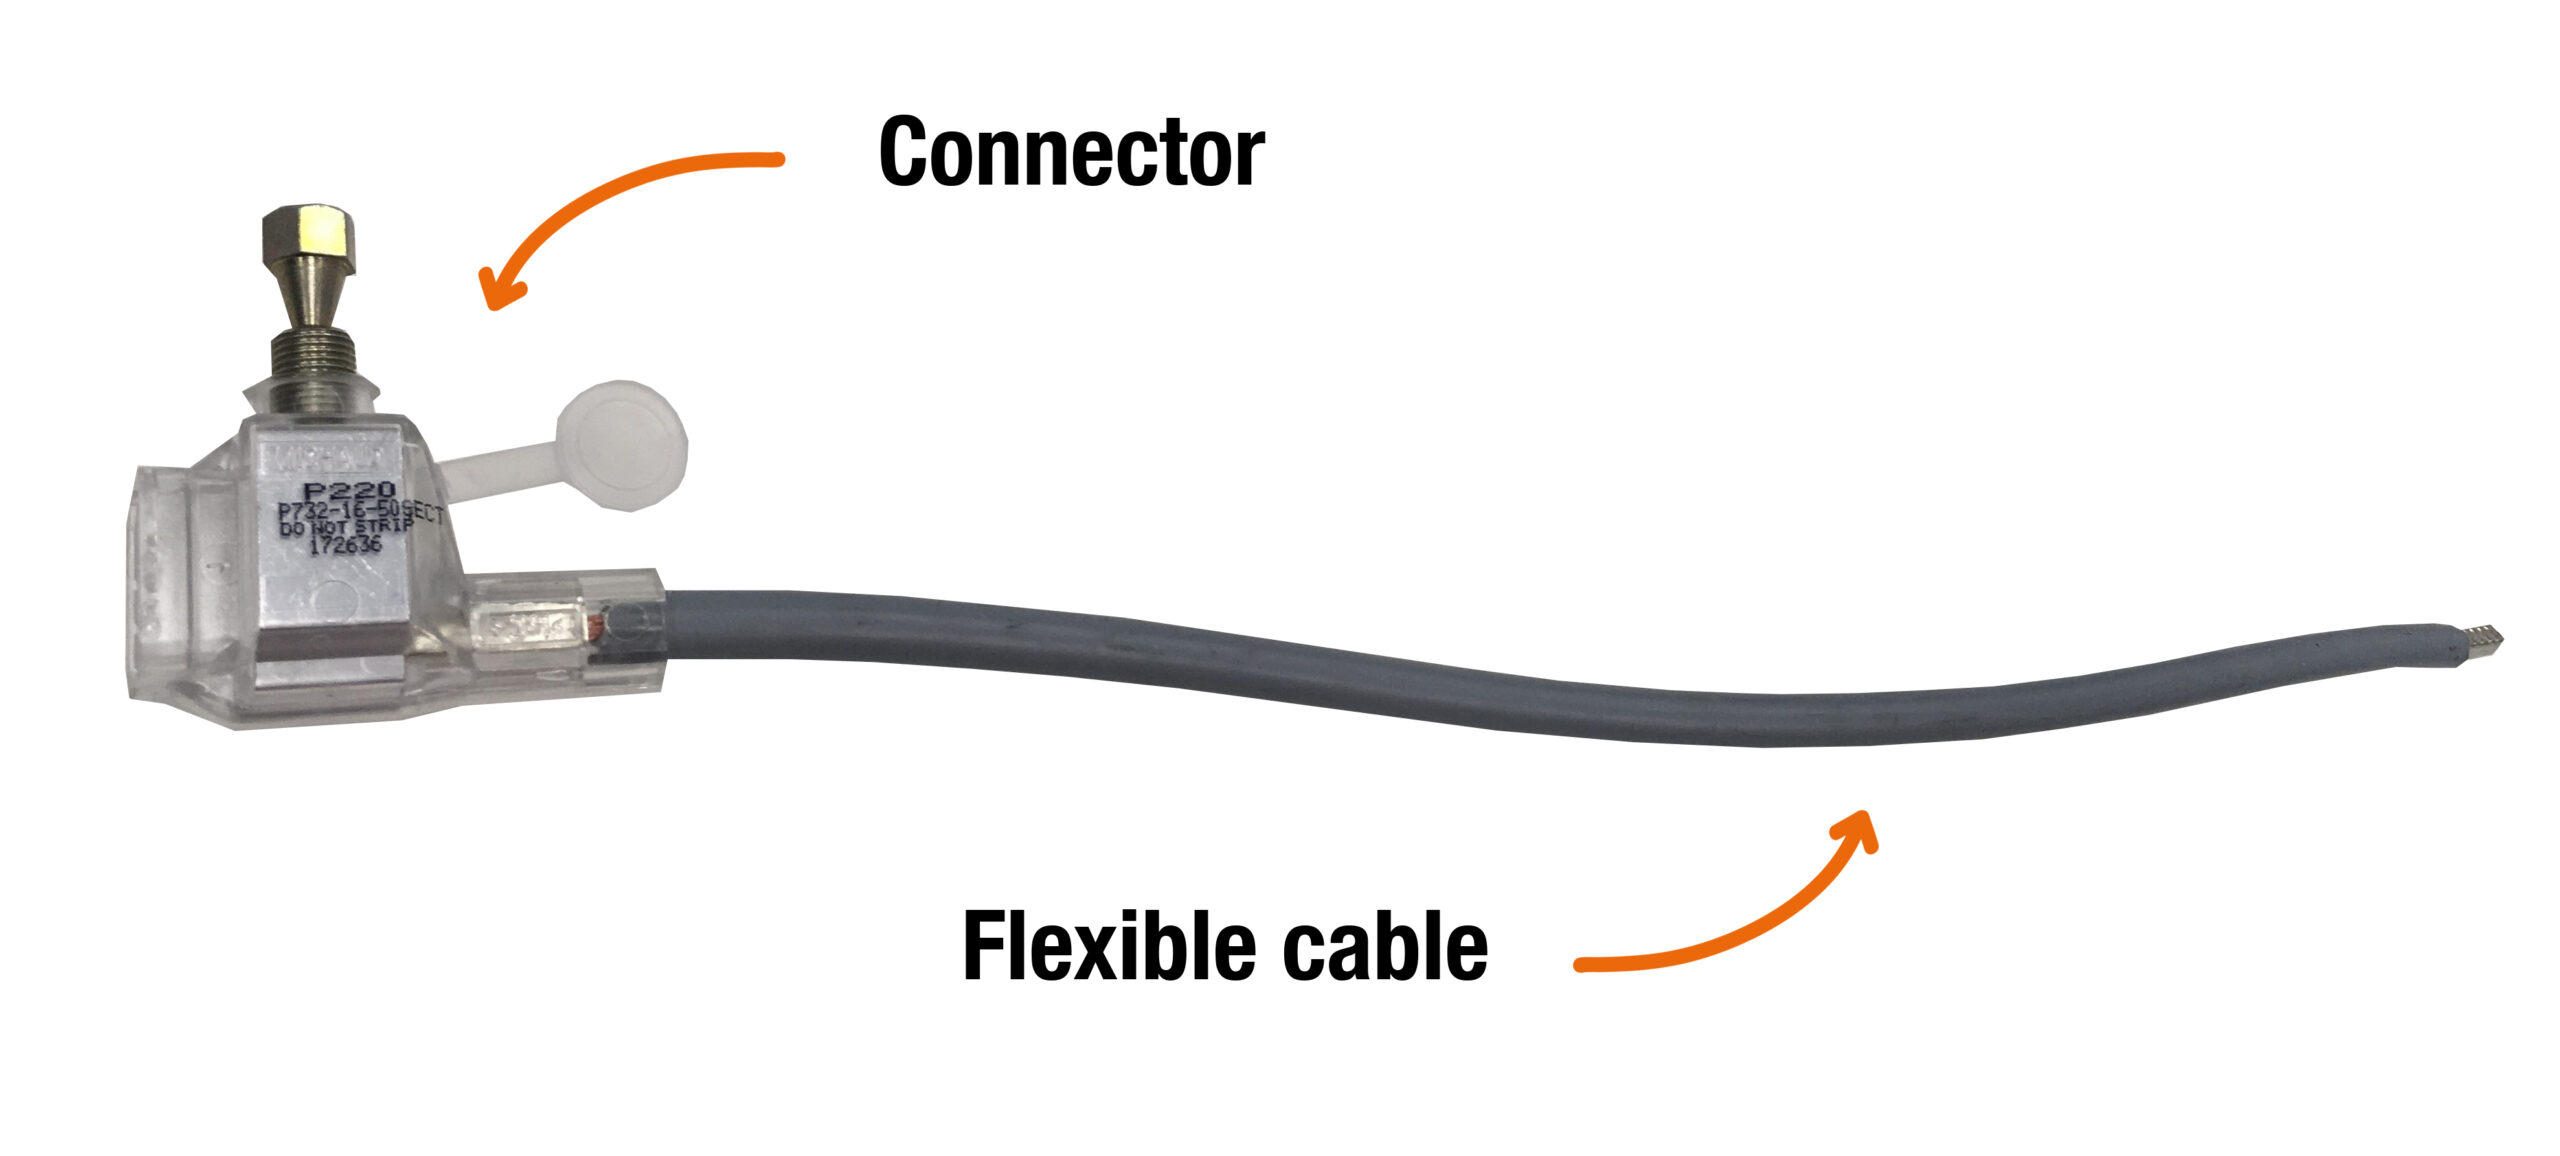 The drawing shows the connector part and the flexible cable part of an EBCP, used for the connection to the electrical network.